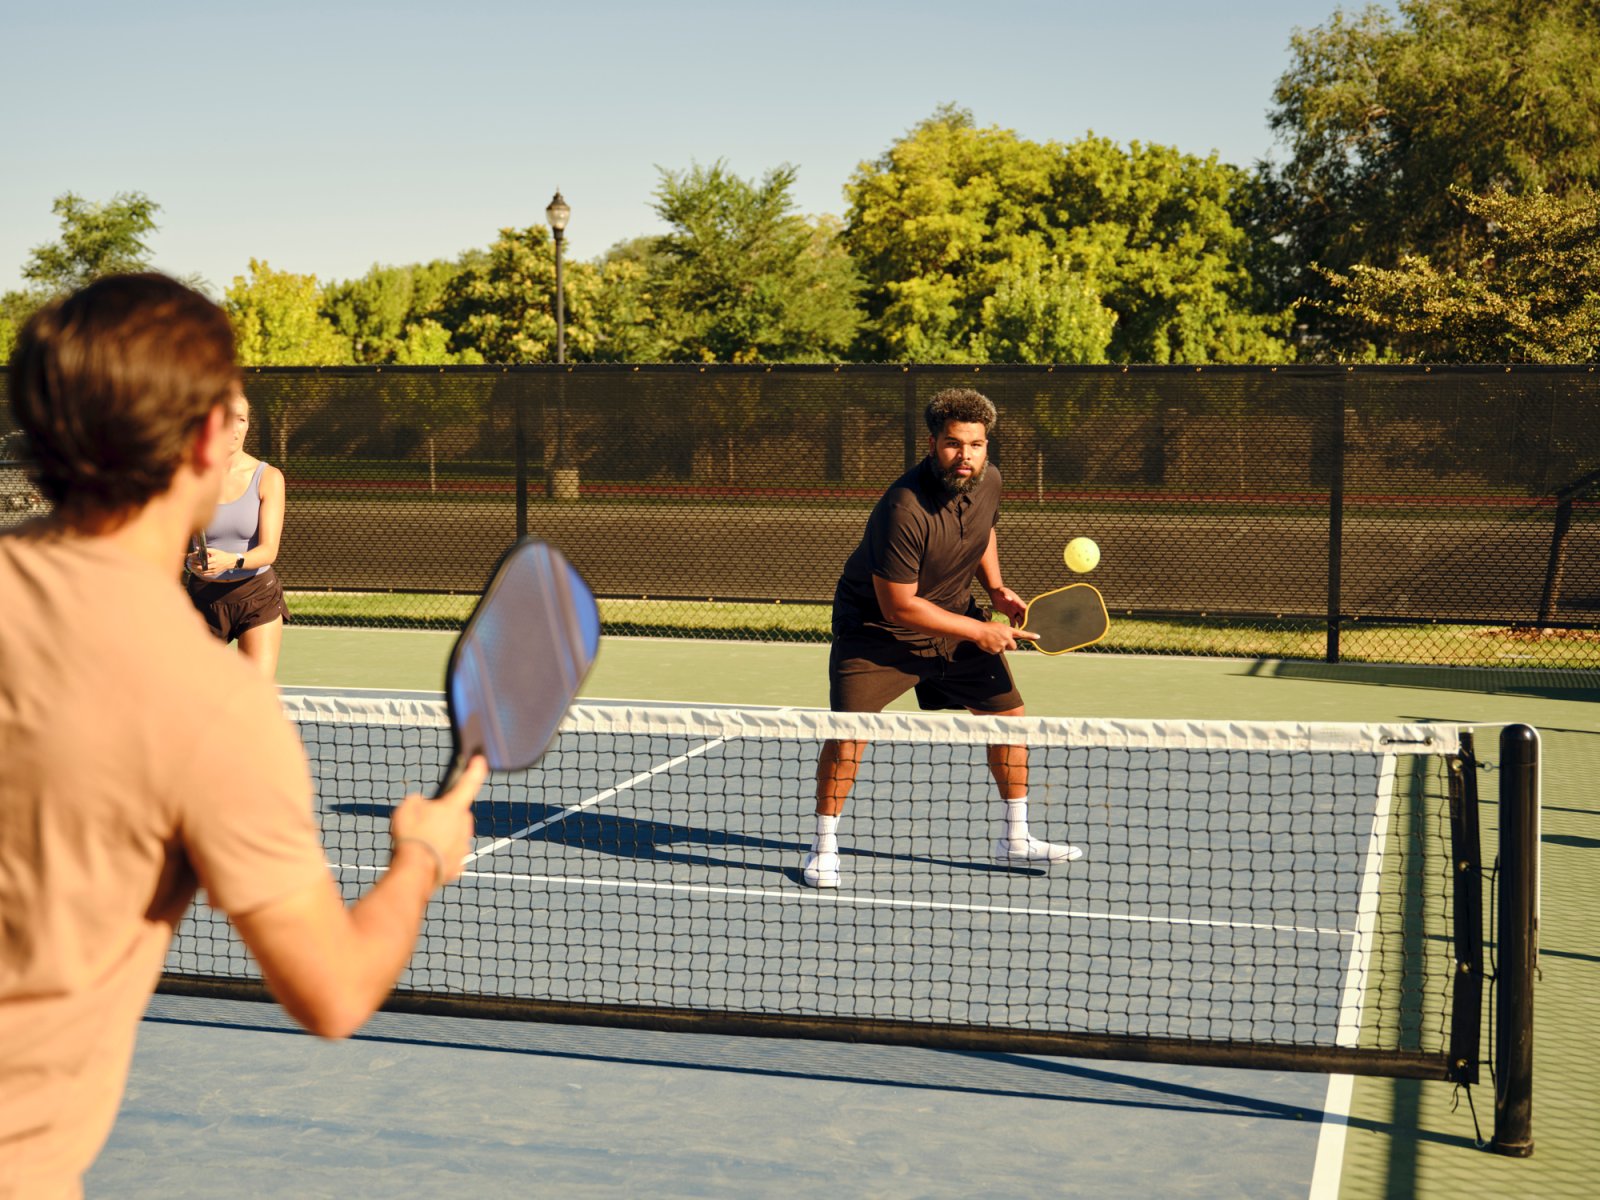 A sport on fire': How the exponential growth of pickleball has served up  controversy